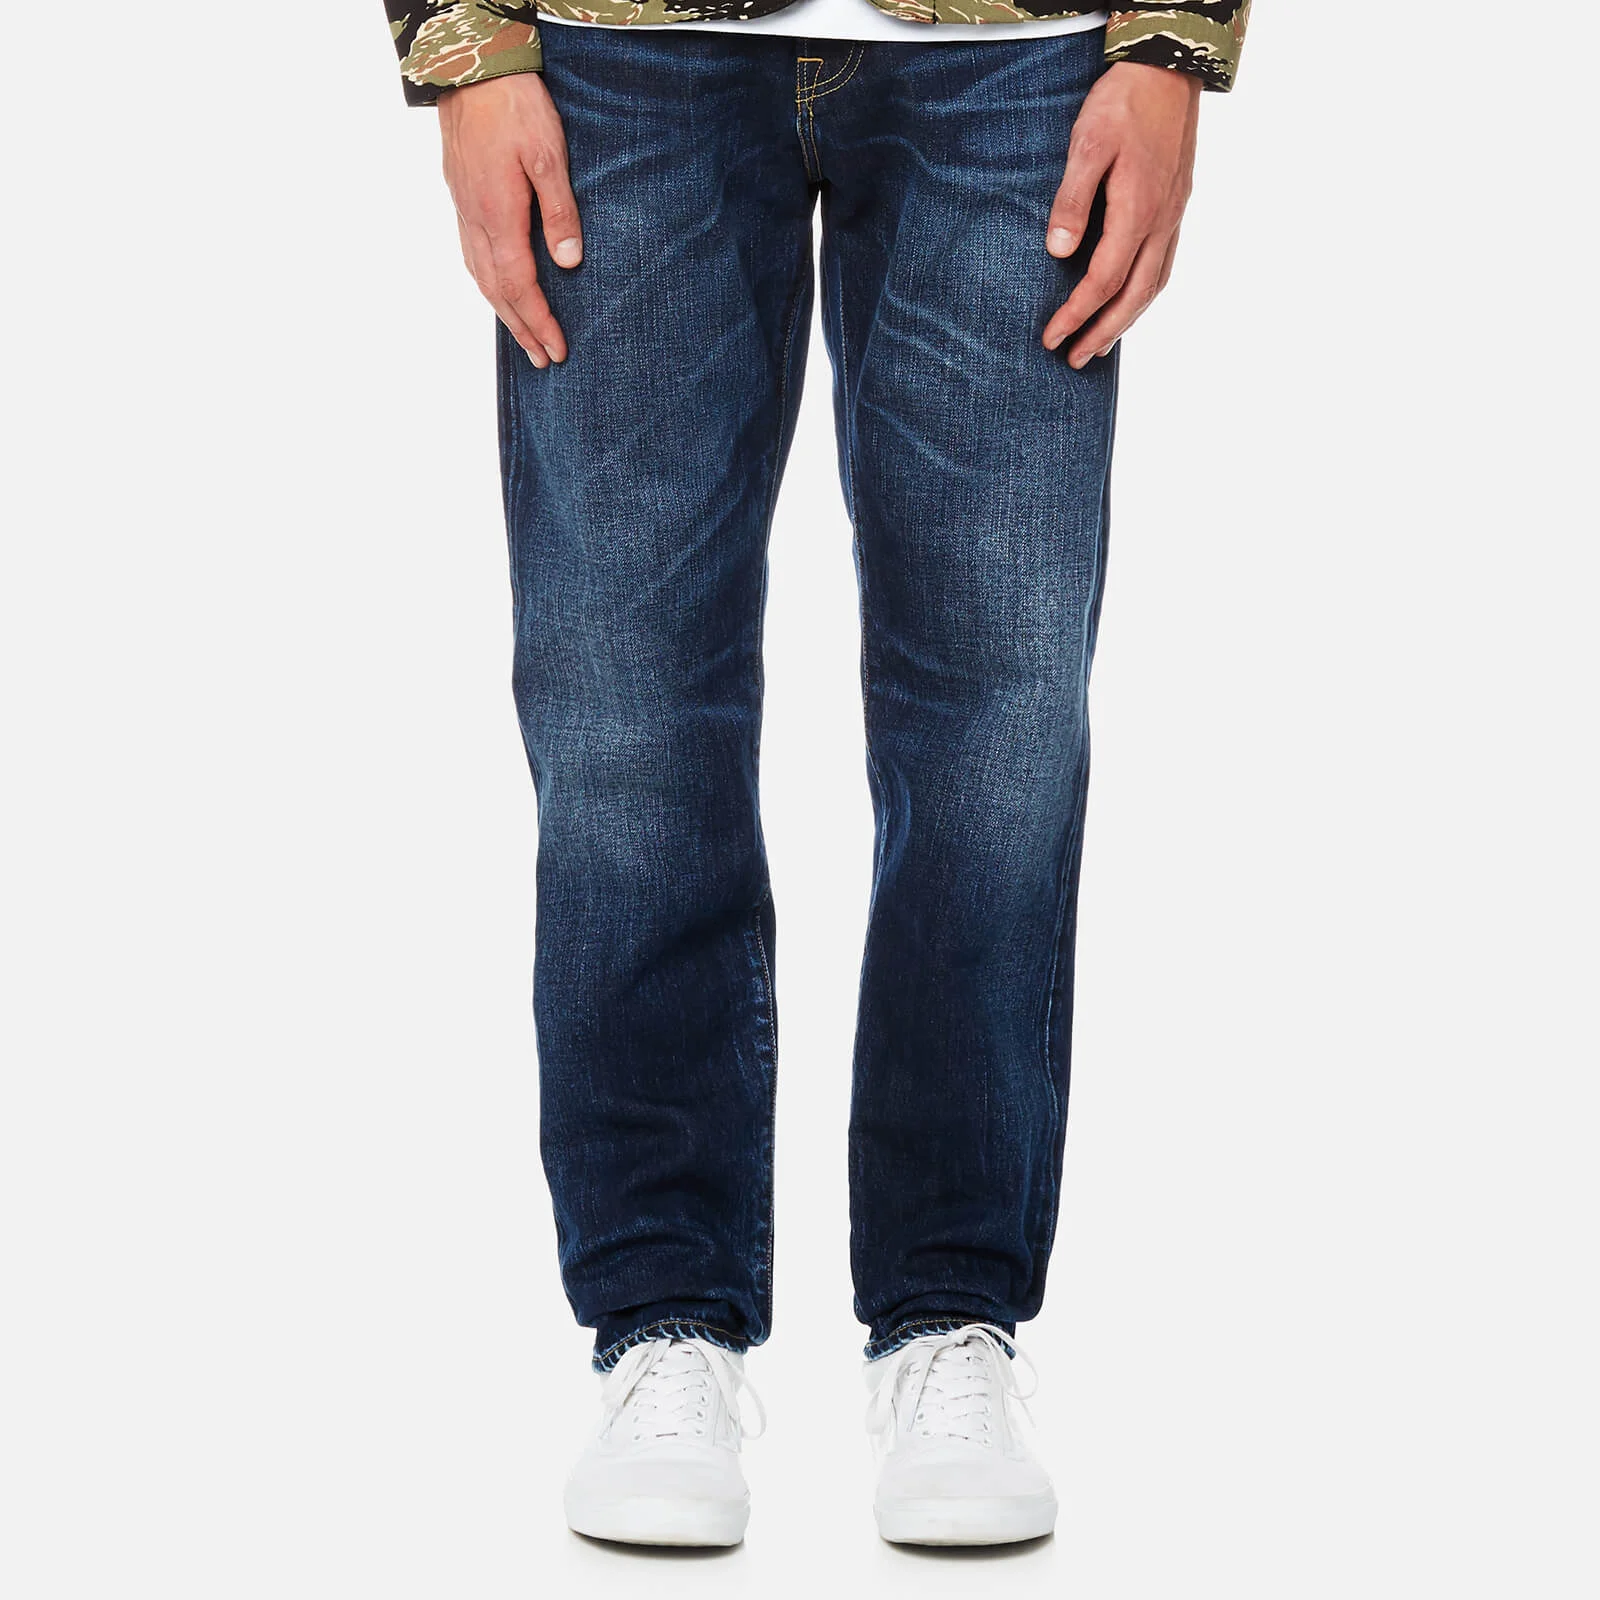 Edwin Men's Ed-45 Loose Tapered Jeans - Contrast Clean Wash Image 1